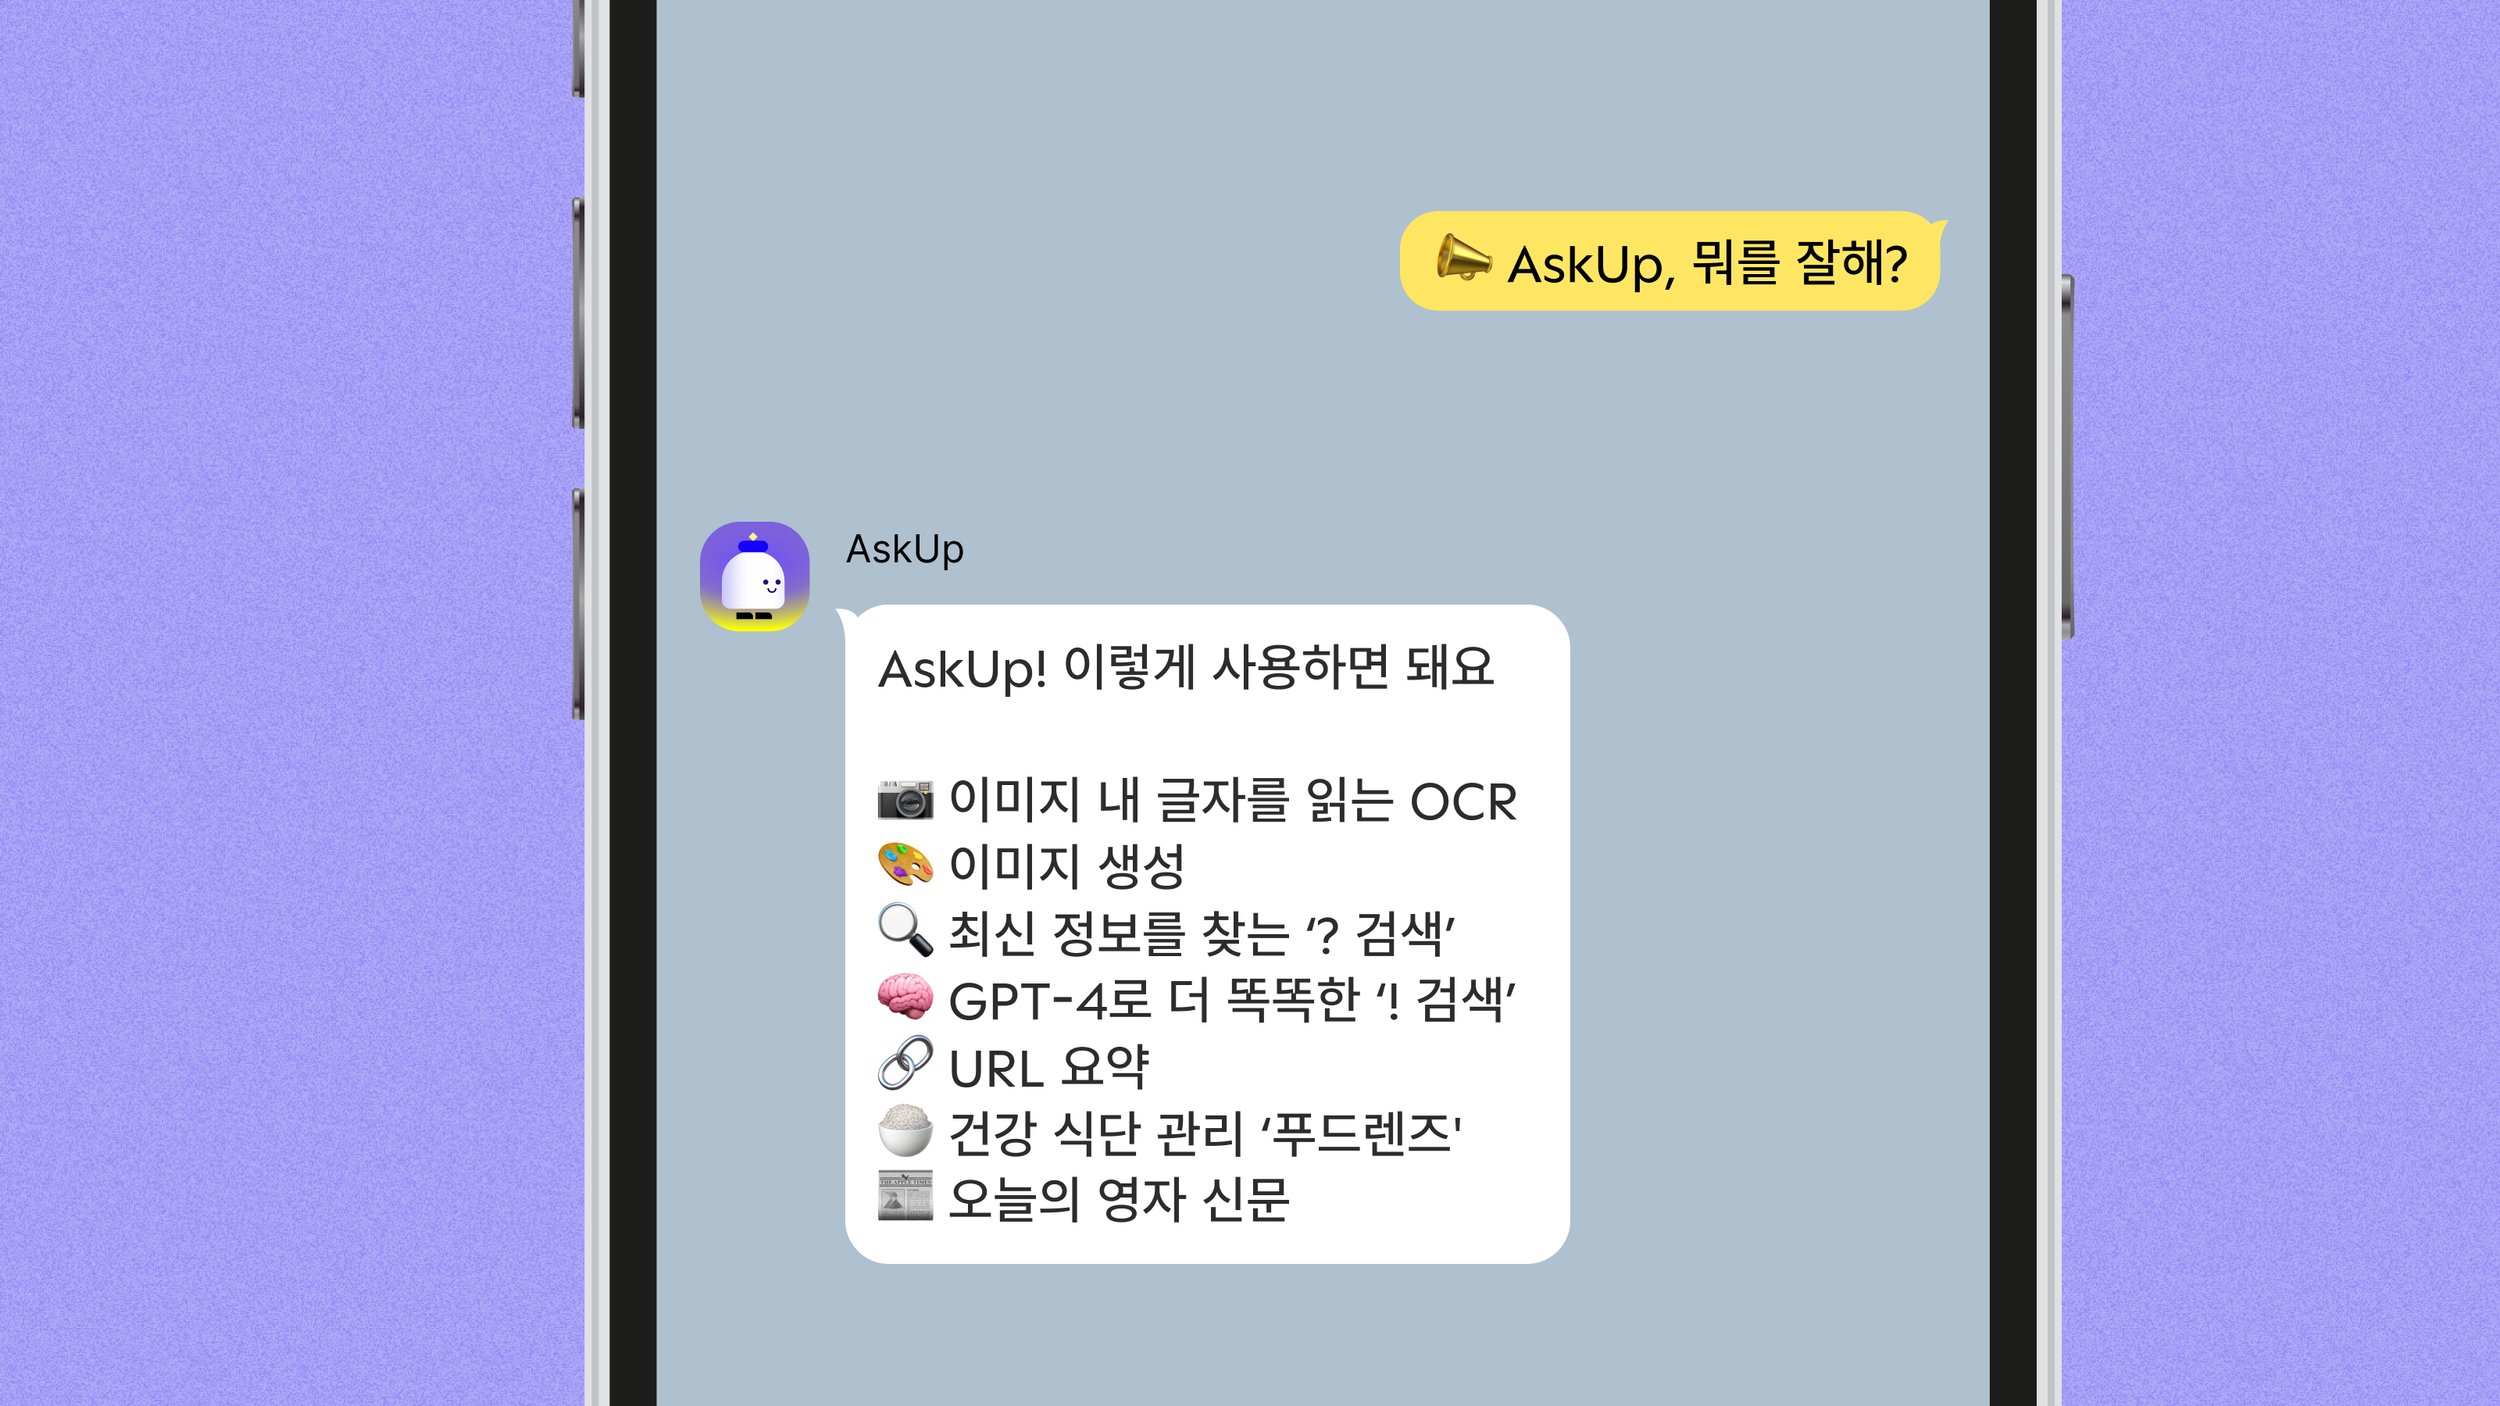 AskUp Official User Guide Vol. 2 - Feature set